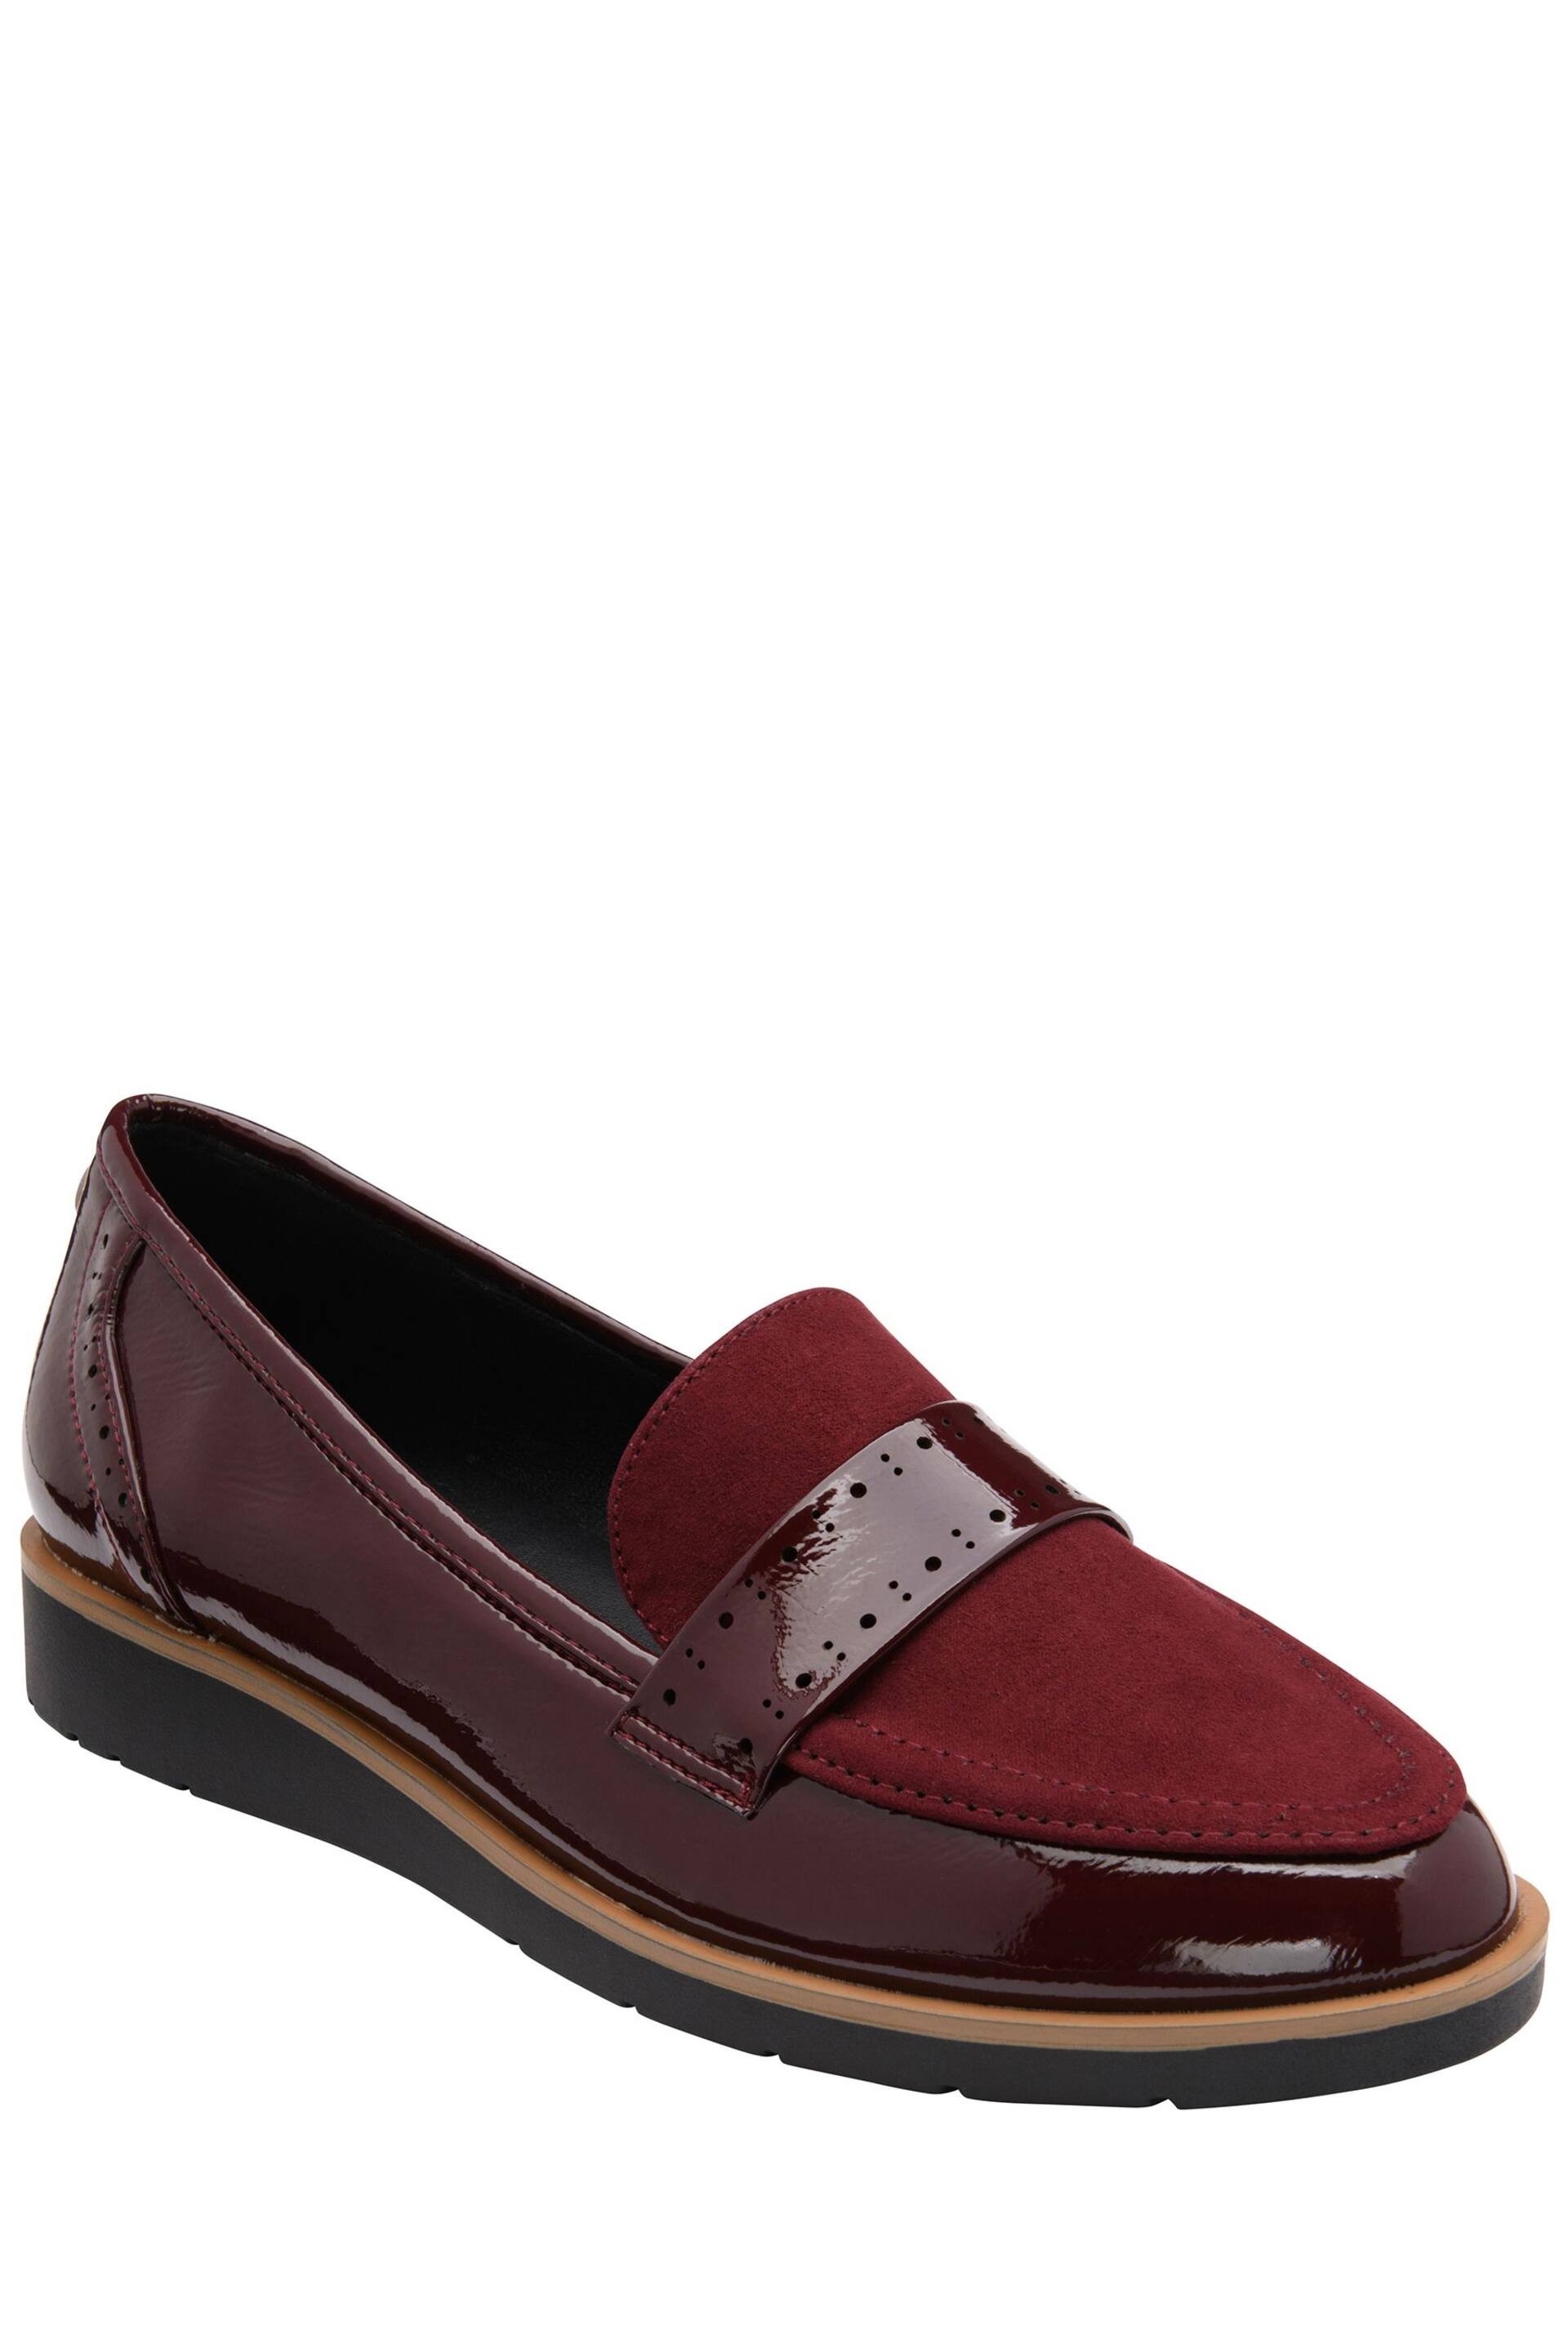 Lotus Red Wedge Loafers - Image 1 of 4